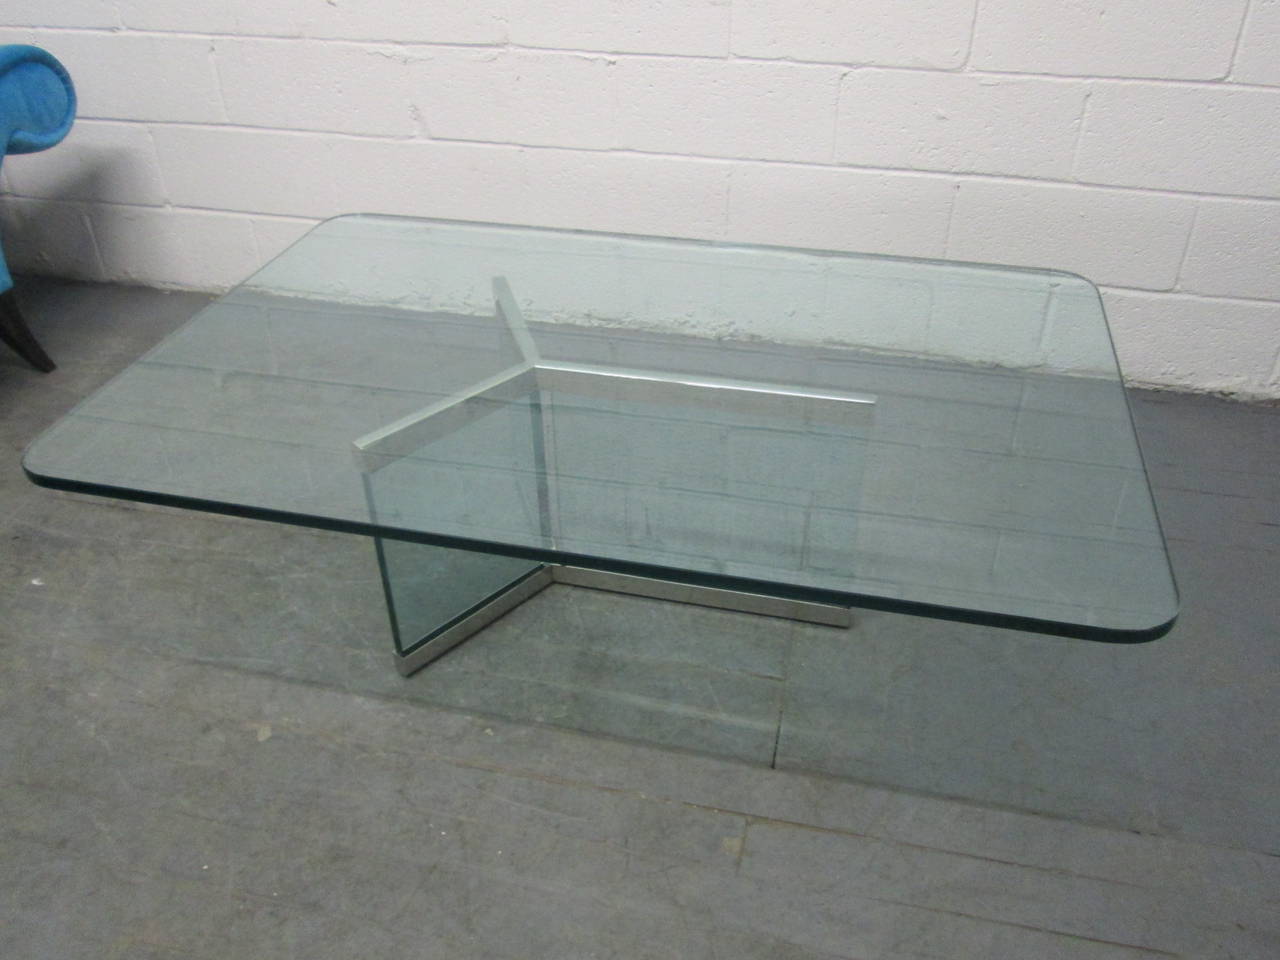 Chrome and glass coffee table by Brueton.